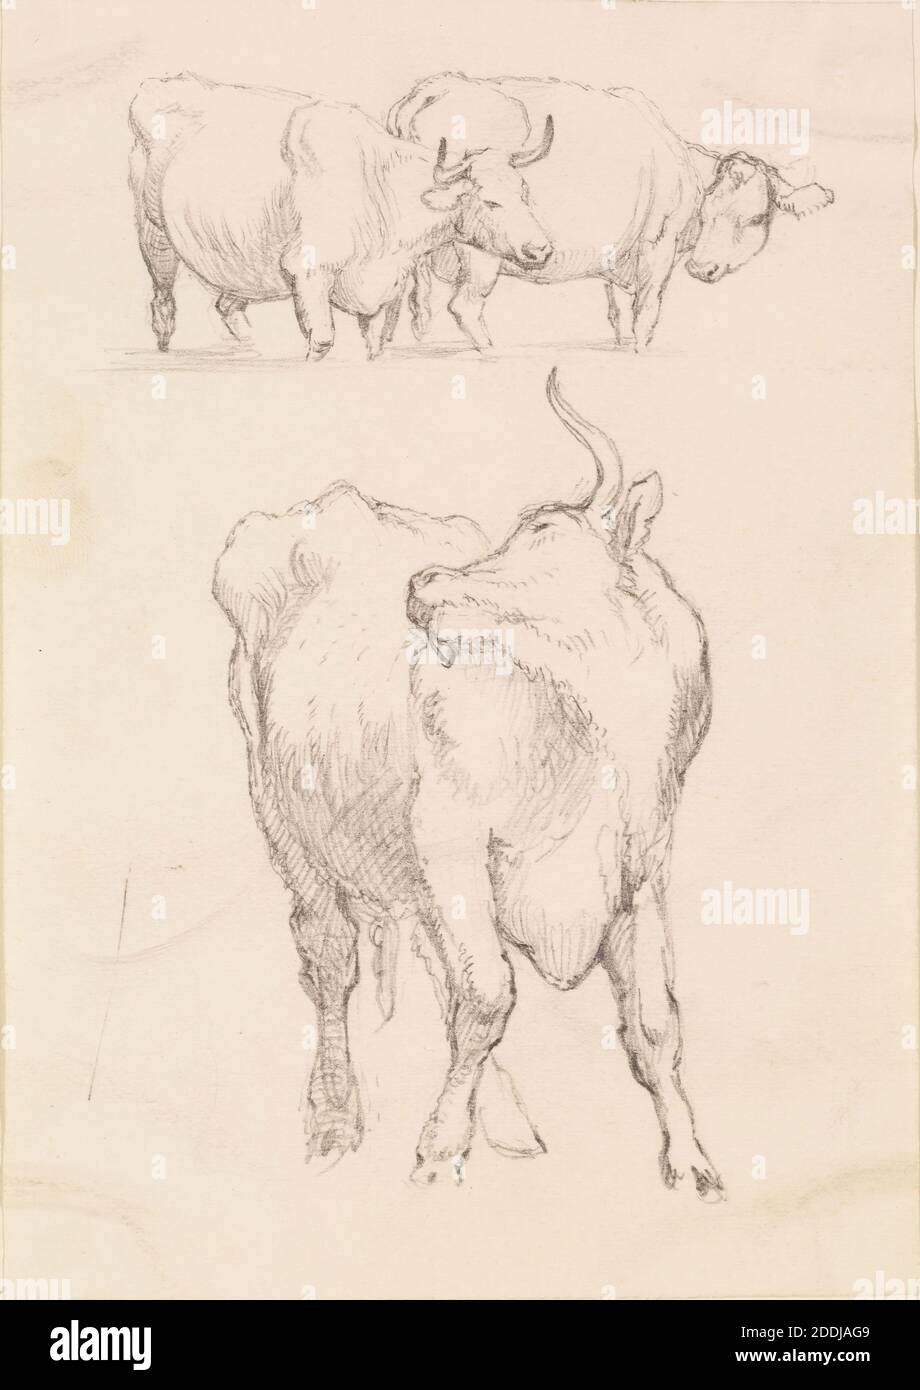 Two Studies of Cattle, 1857-58 Frederick Sandys, Art Movement, Pre-Raphaelite, Drawing, Pencil, Sketch, Animal, Cow, Study, Works on Paper Stock Photo